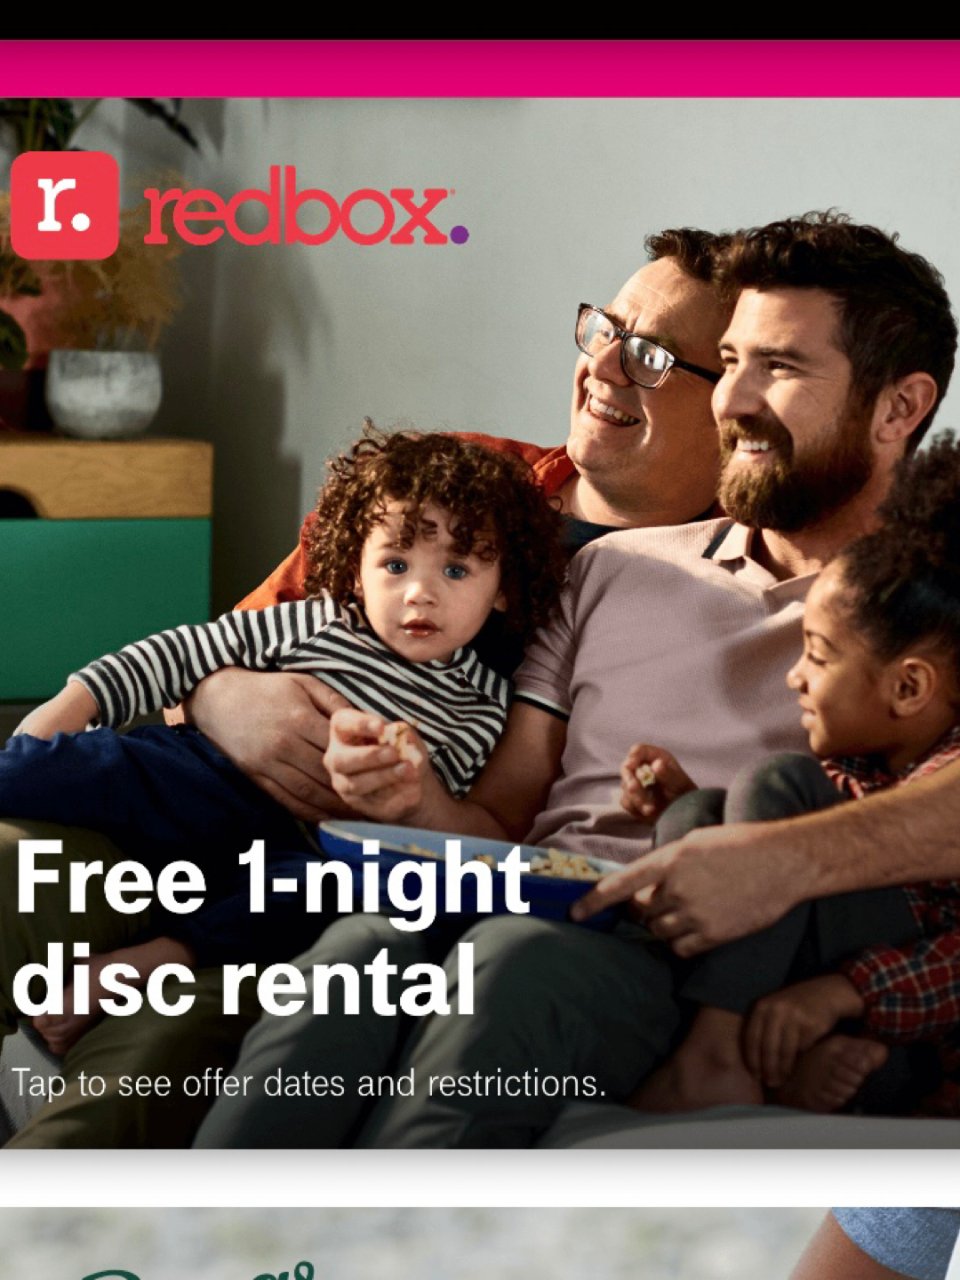 Redbox,Mulan (2020) for Rent, & Other New Releases on DVD at Redbox